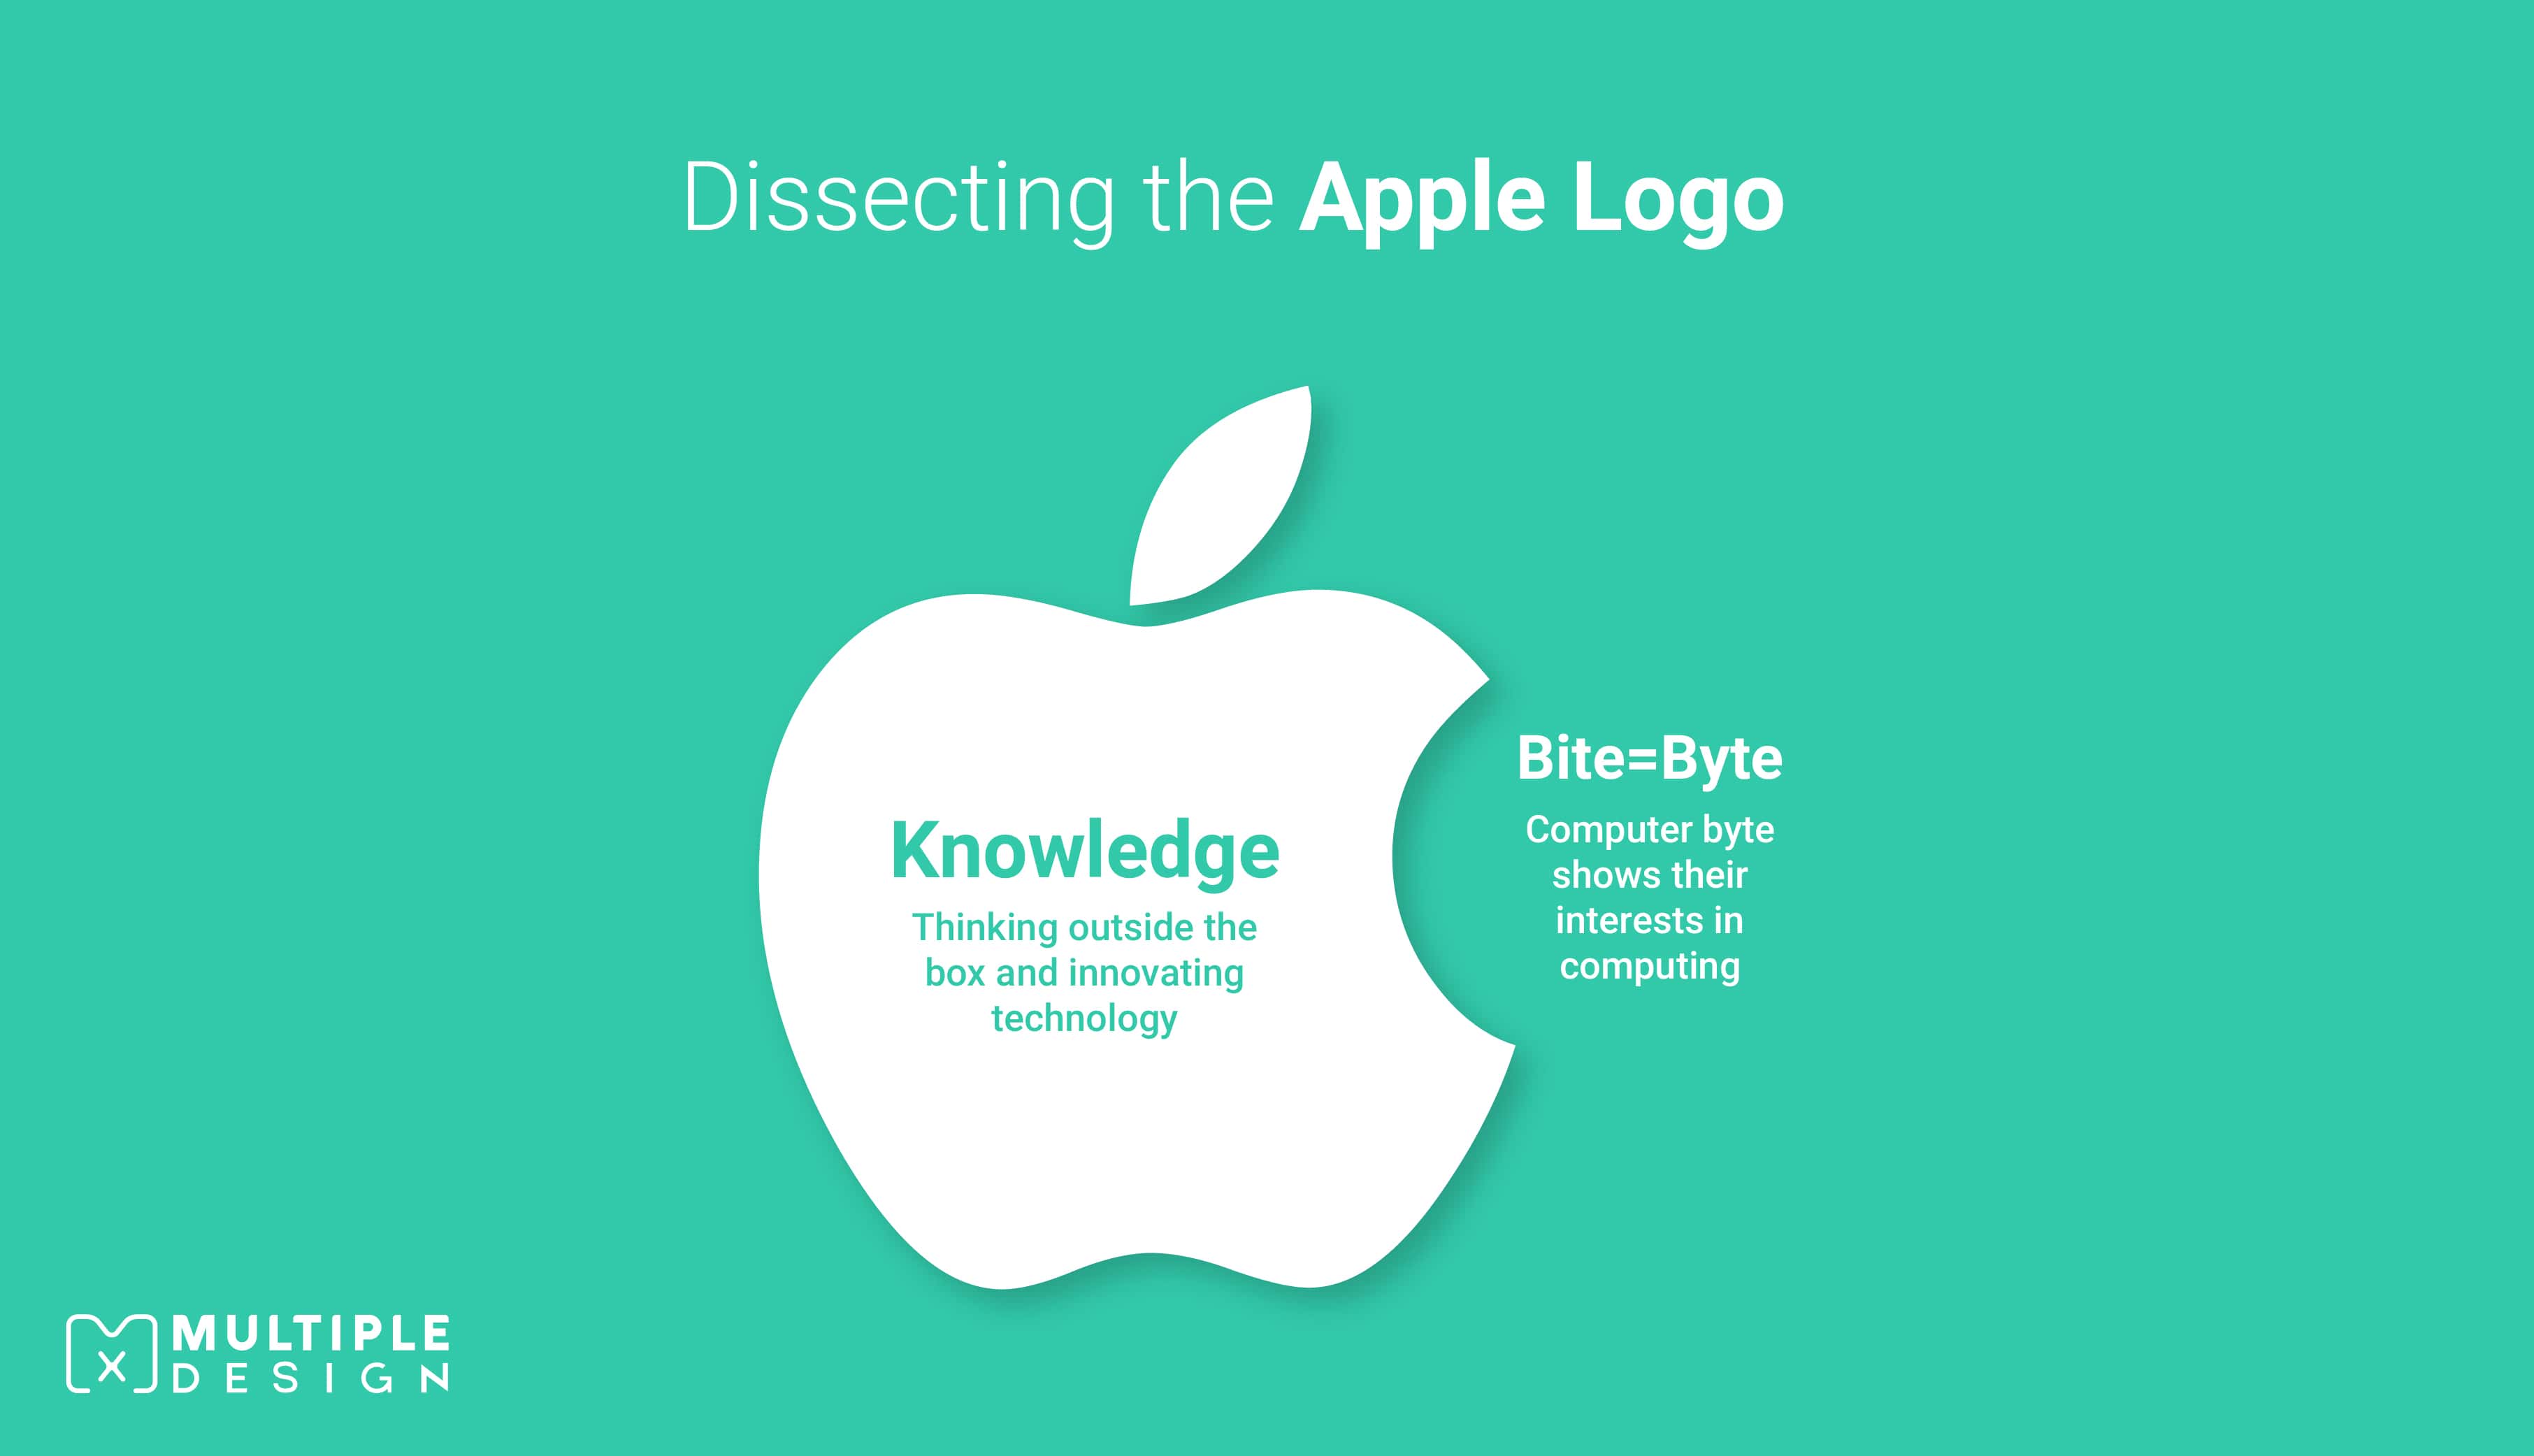 Dissecting the Apple Logo - Knowledge and Bytes